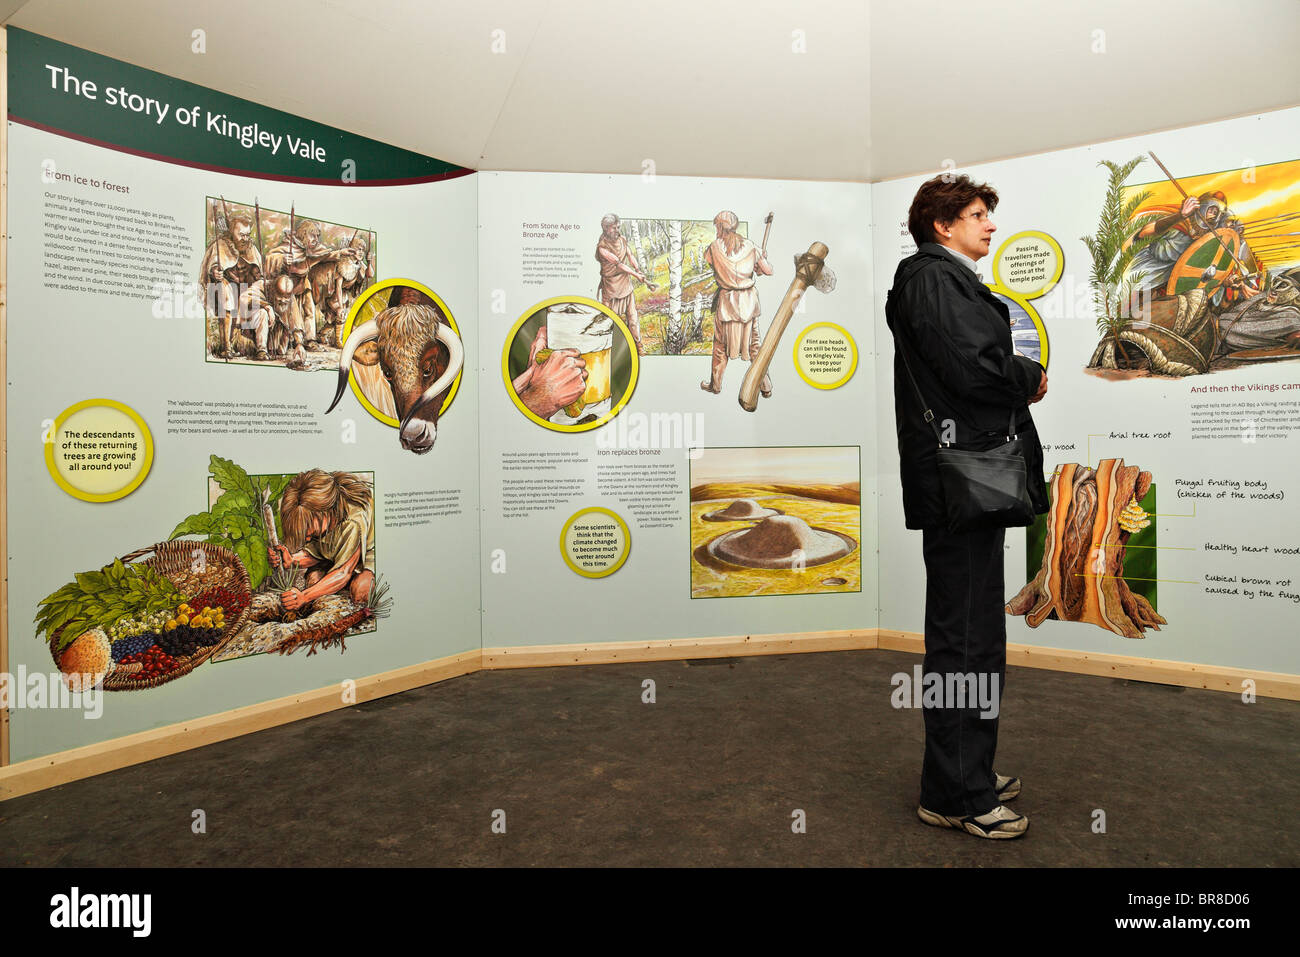 Kingley Vale "Field Museum' visitor information capanna. Foto Stock